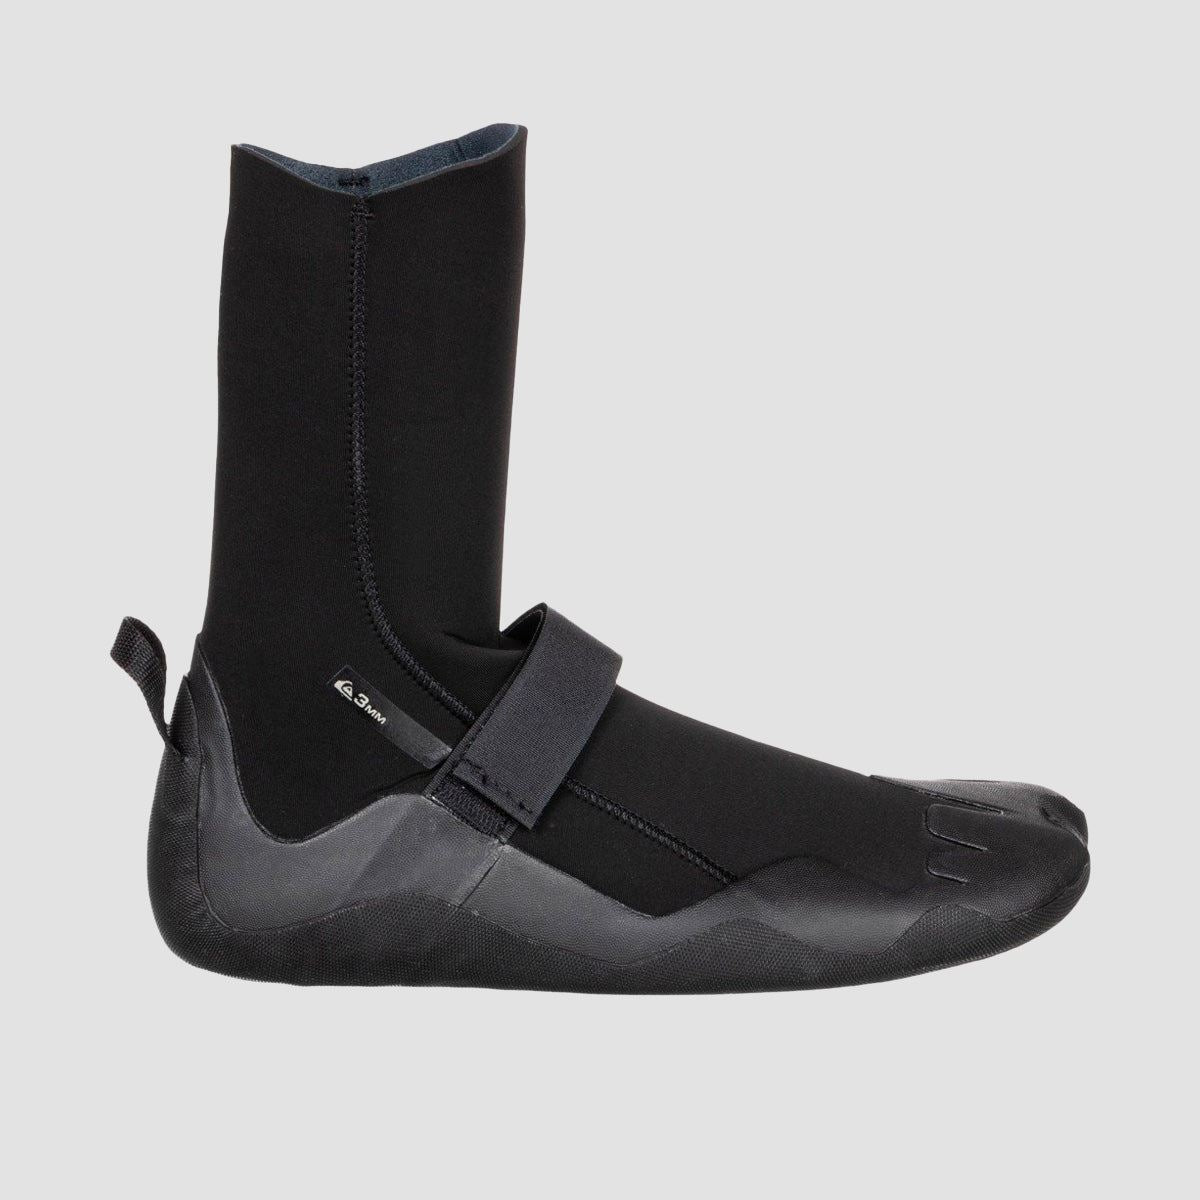 Quiksilver Everyday Sessions 3mm Wetsuit Boots Black